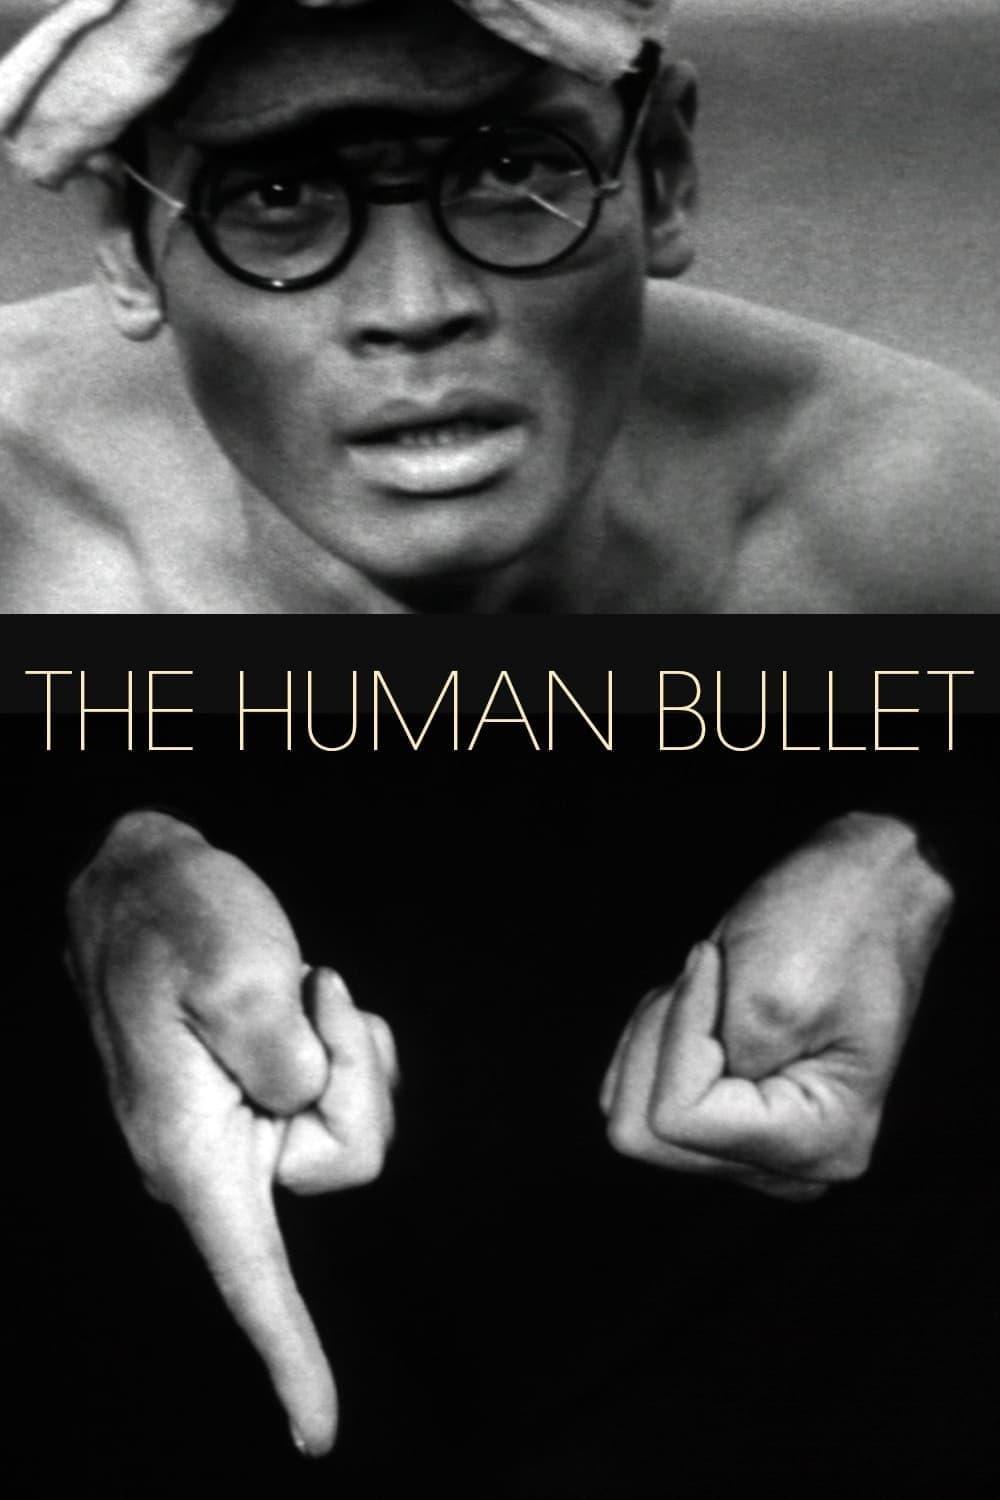 The Human Bullet poster